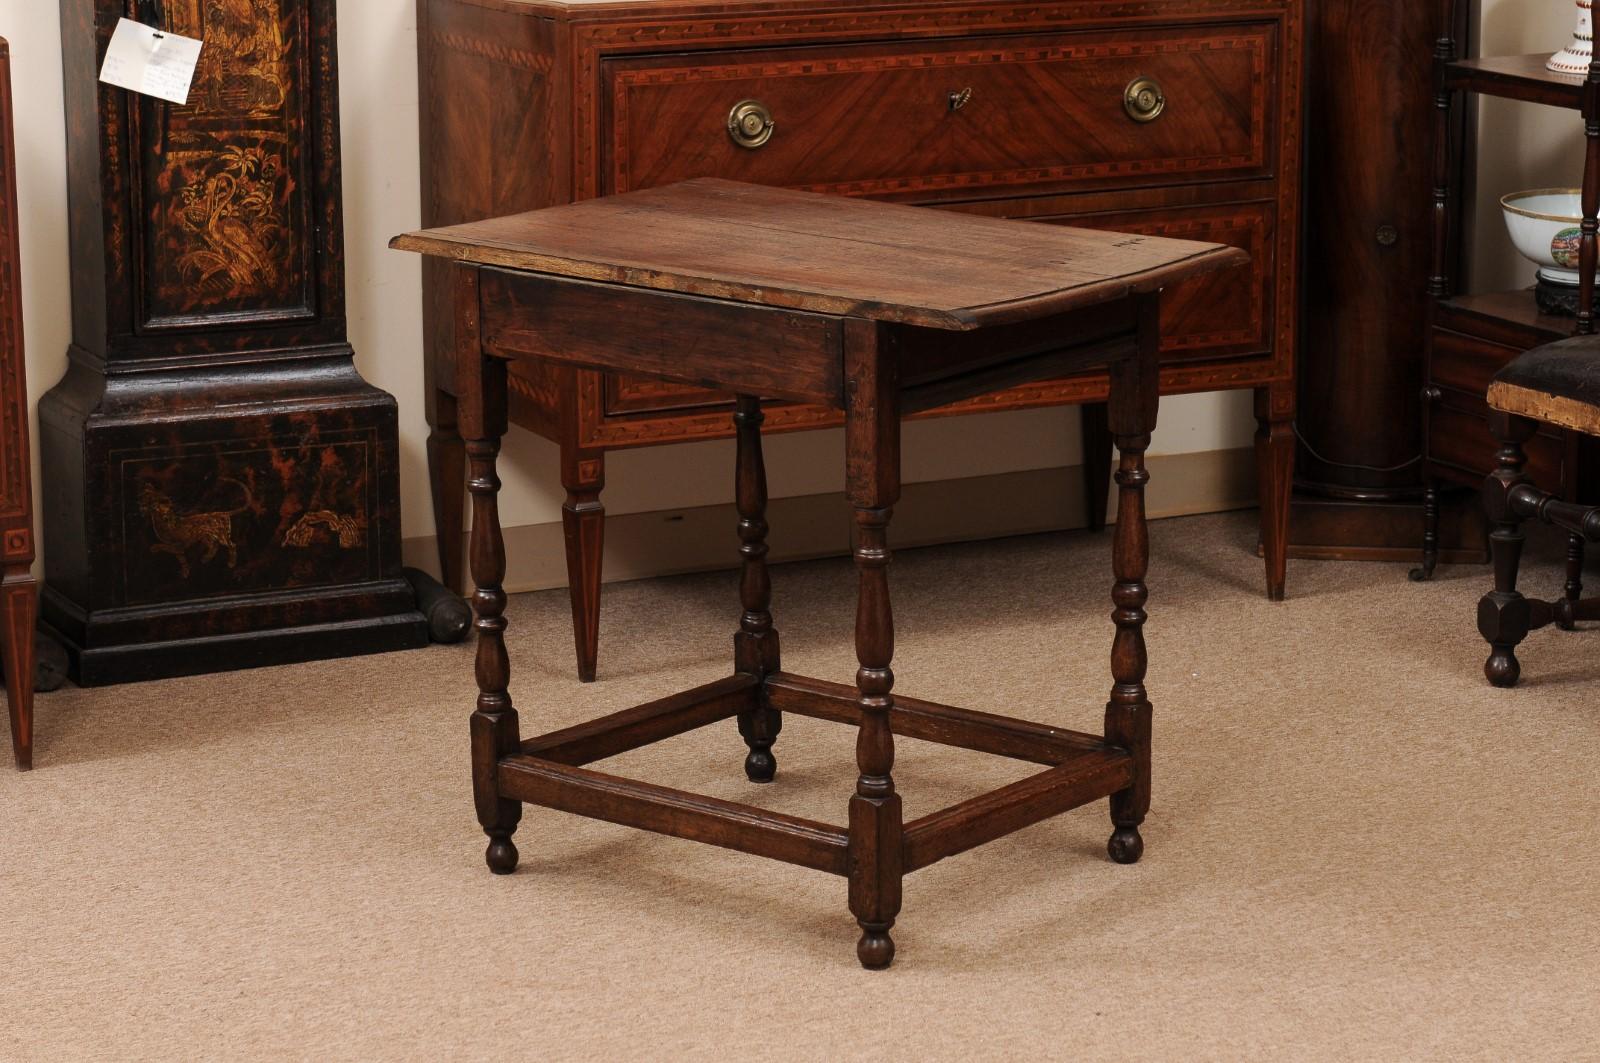 English 18th century Side Table with 1 Drawer, Turned Legs & Box Stretcher 5